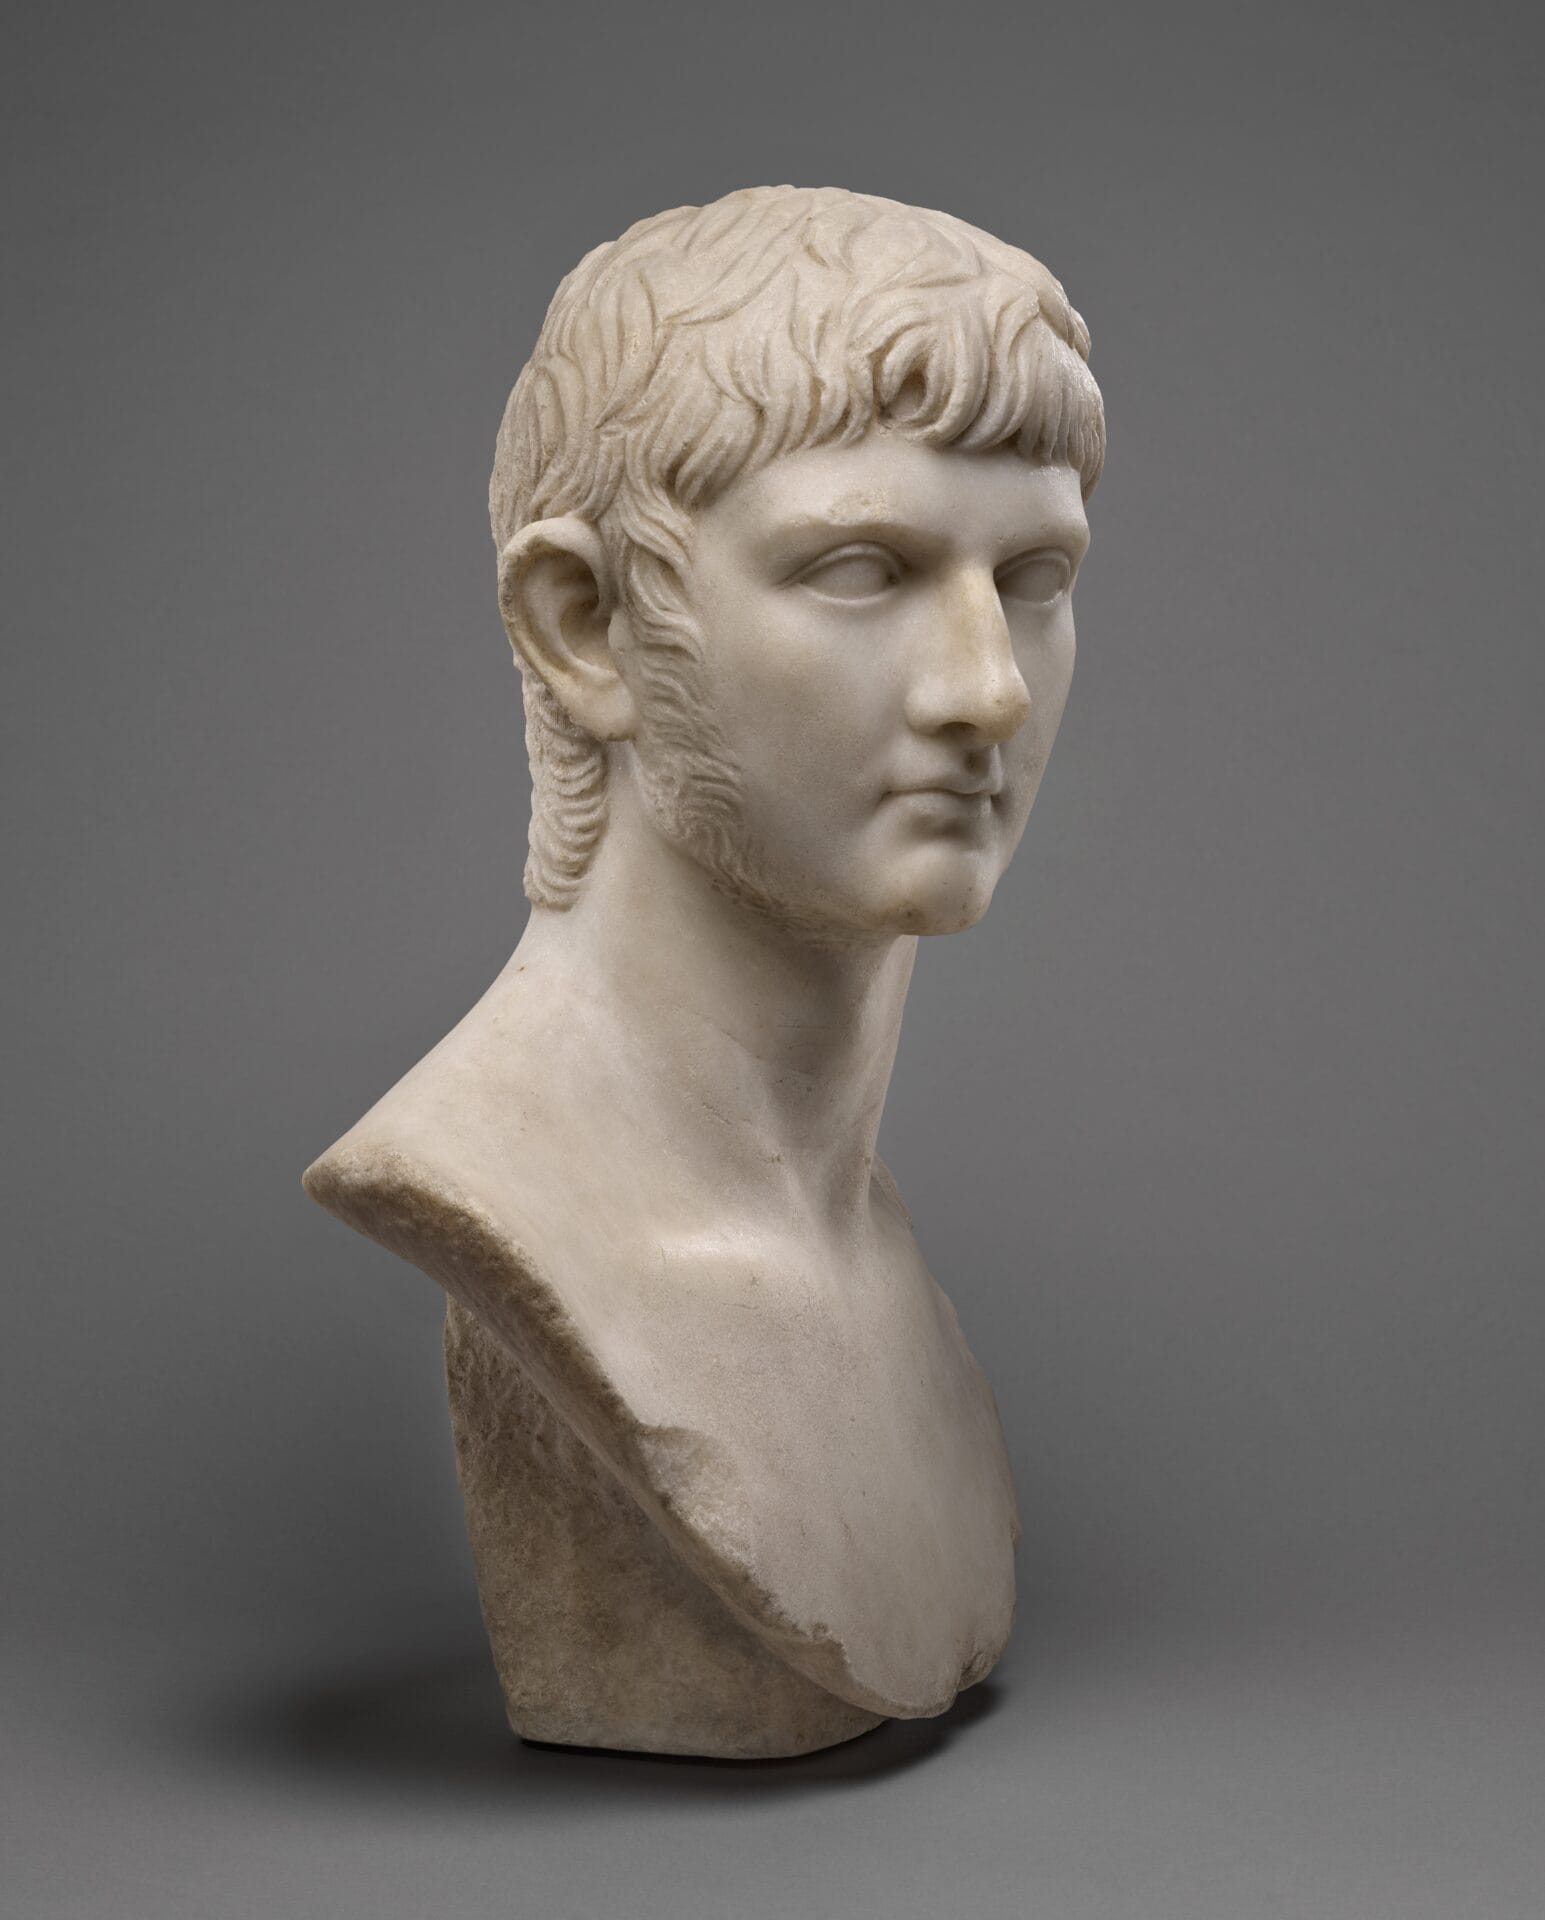 Germanicus: Rome's Beloved General and Imperial Successor